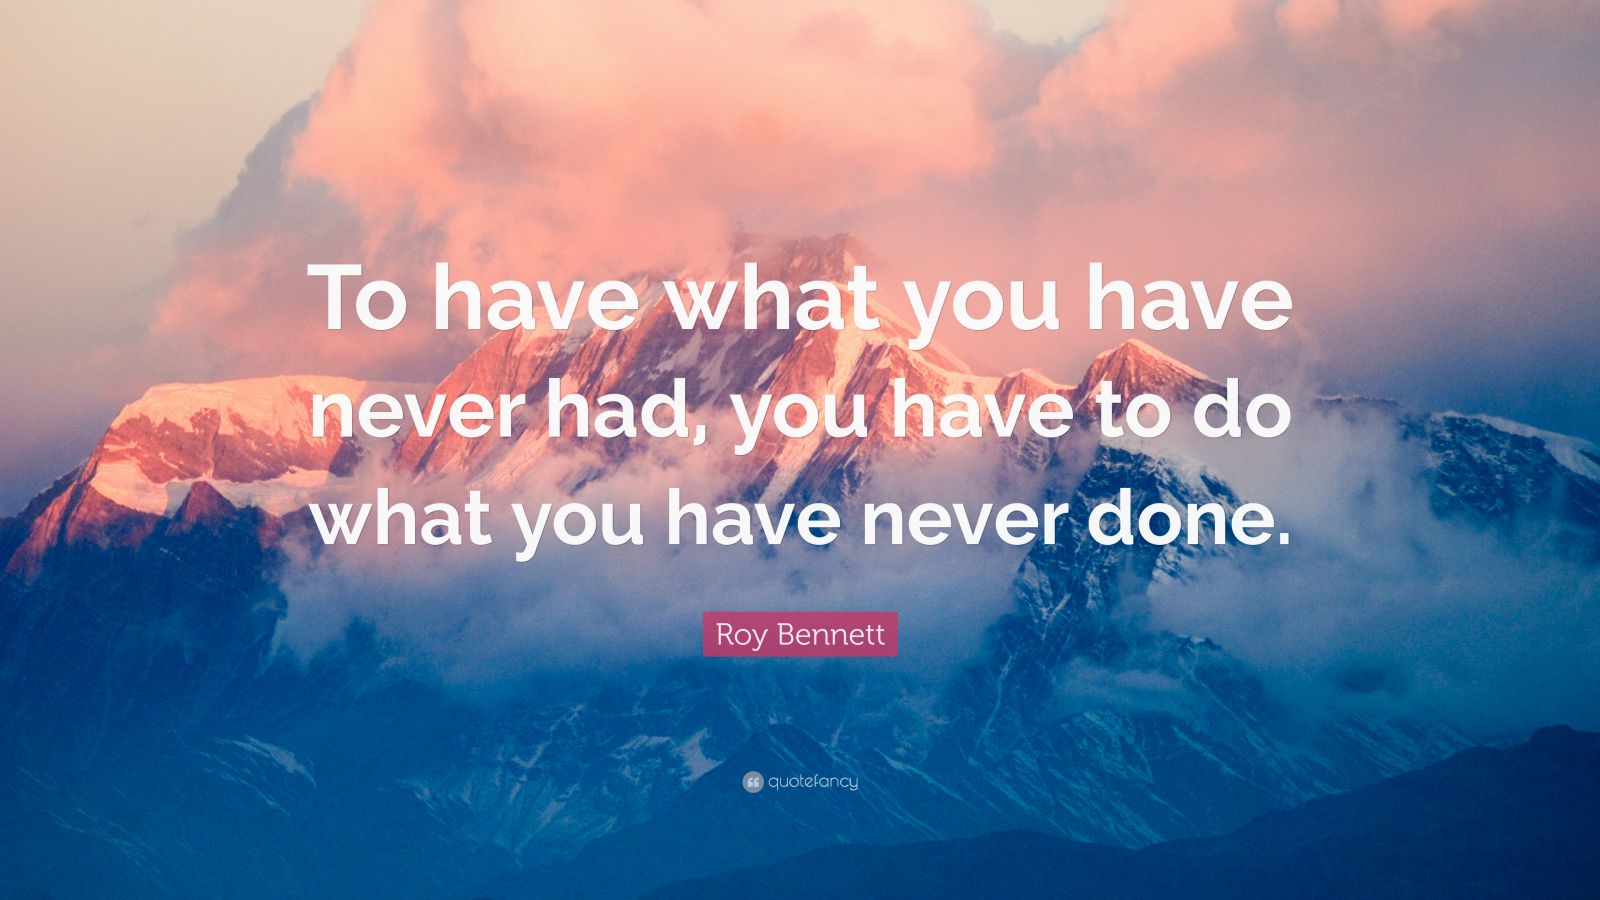 Roy Bennett Quote “to Have What You Have Never Had You Have To Do What You Have Never Done”